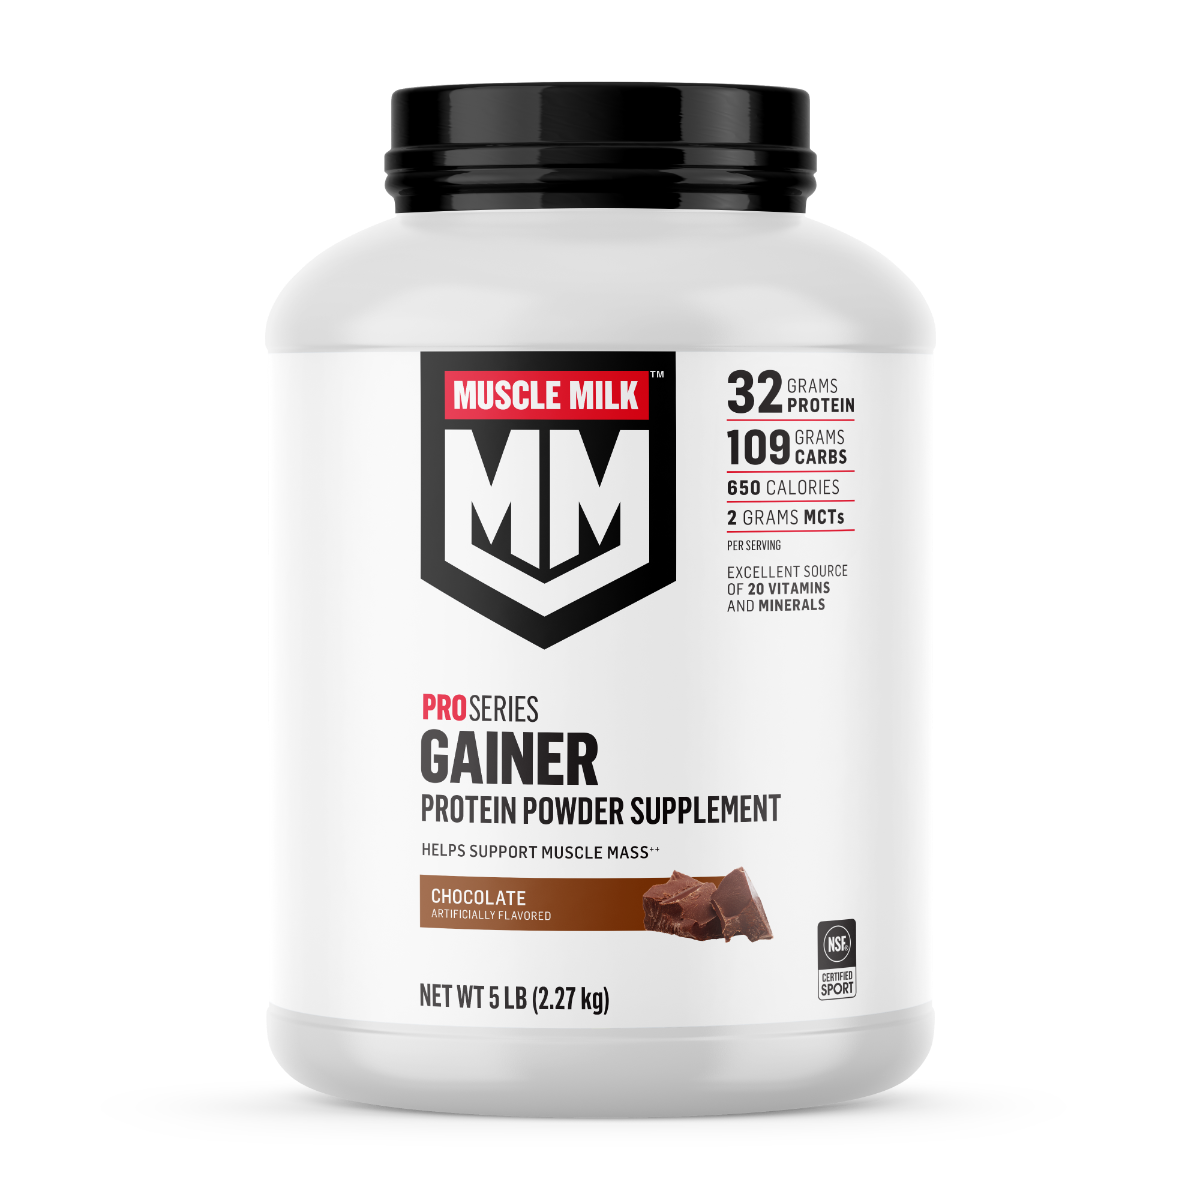 Muscle Milk Gainer Protein Powder - cookies and creme